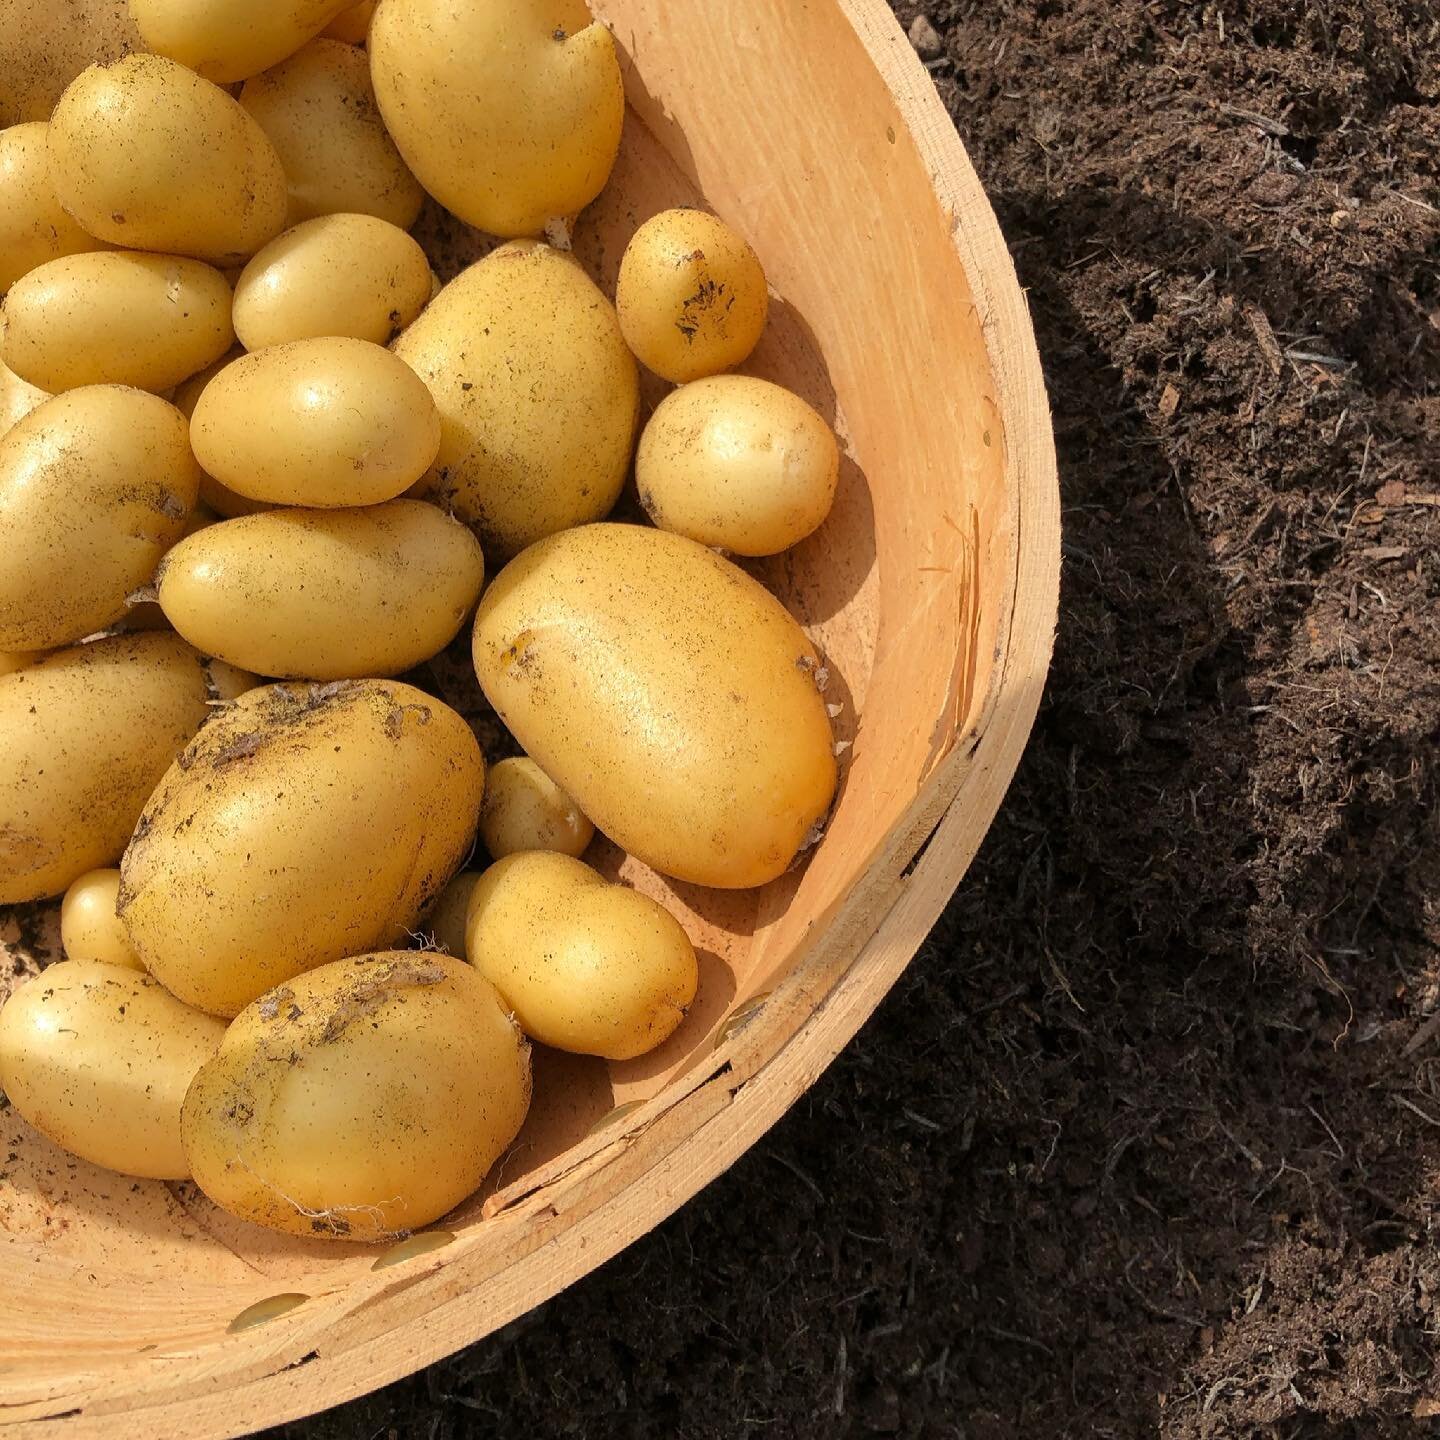 Potatoes! A staple for every meal in my opinion. And there is nothing better than homegrown freshly made potato salad alongside a BBQ in the summer. 

I grew potatoes for the first time last year and am totally addicted. I&rsquo;ve got more bags to g